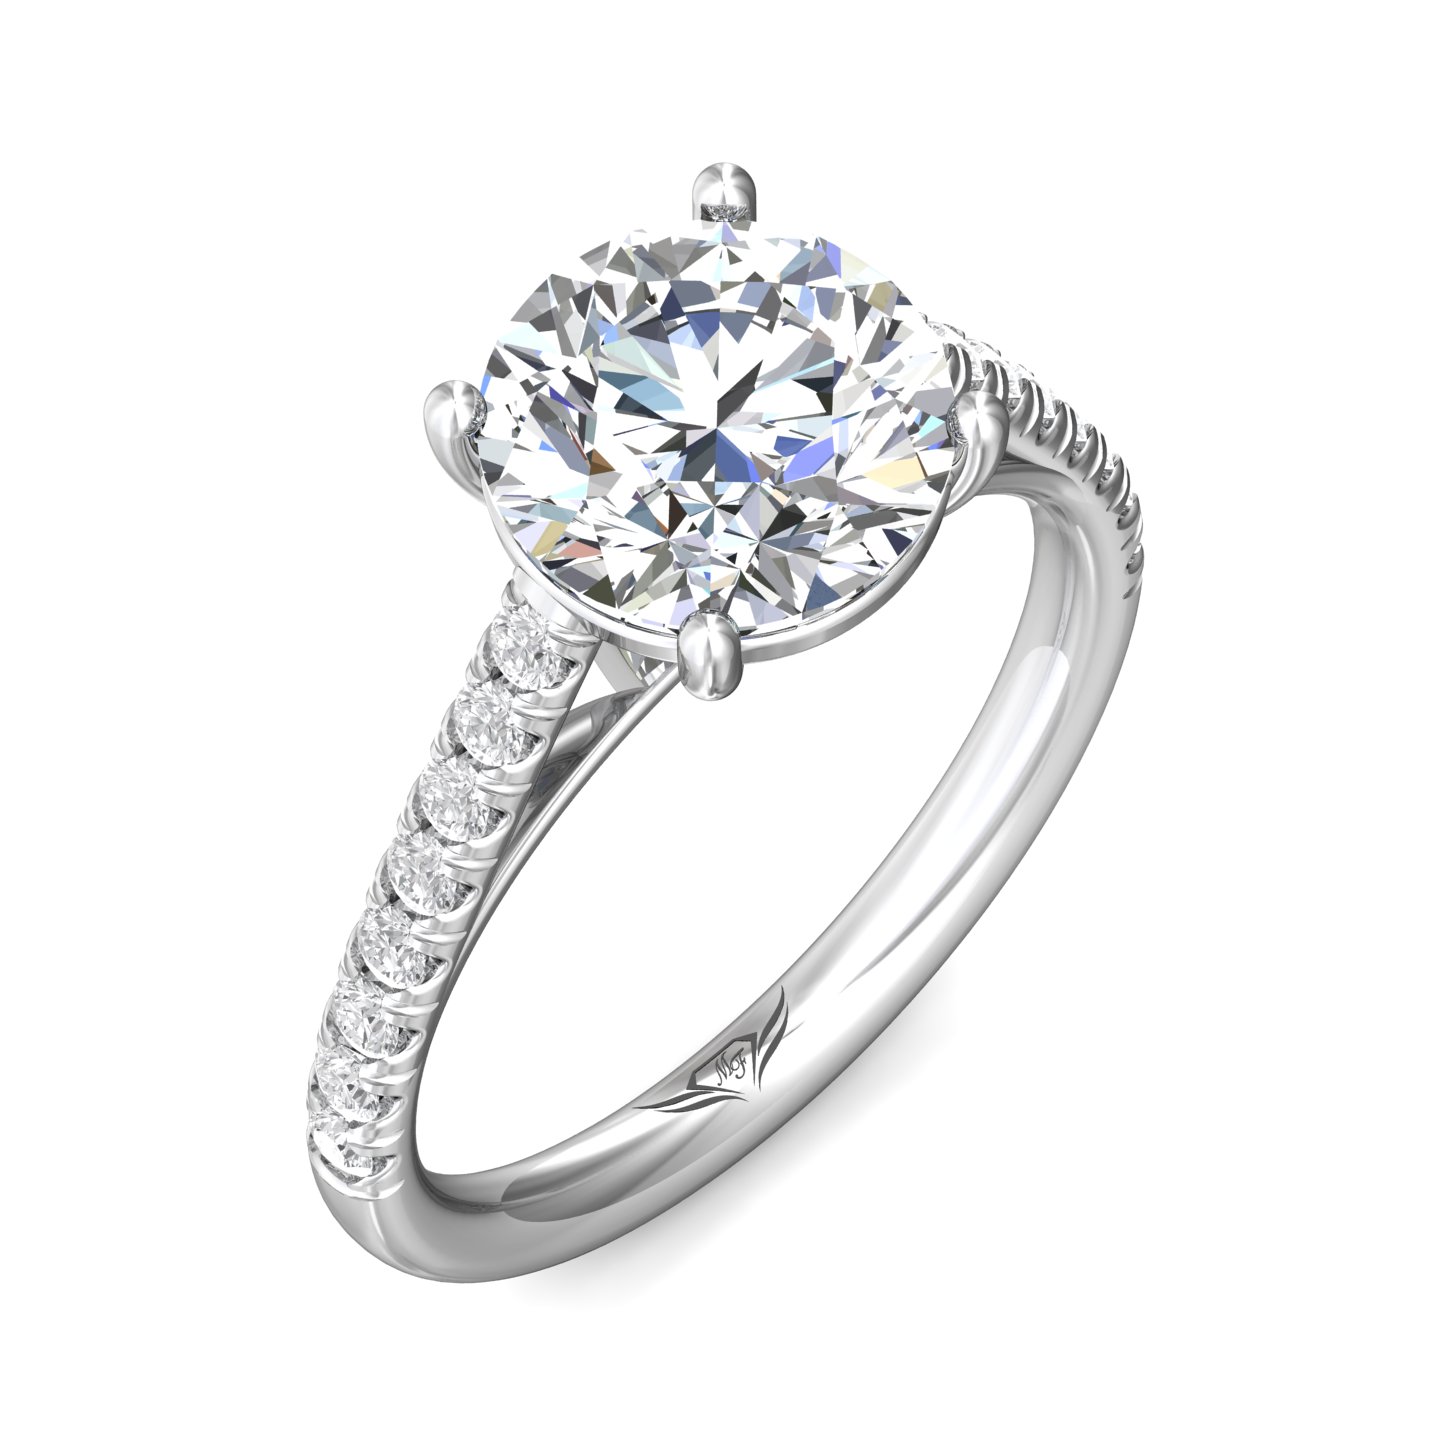 14K White Gold FlyerFit Micropave Engagement Ring Image 5 Christopher's Fine Jewelry Pawleys Island, SC